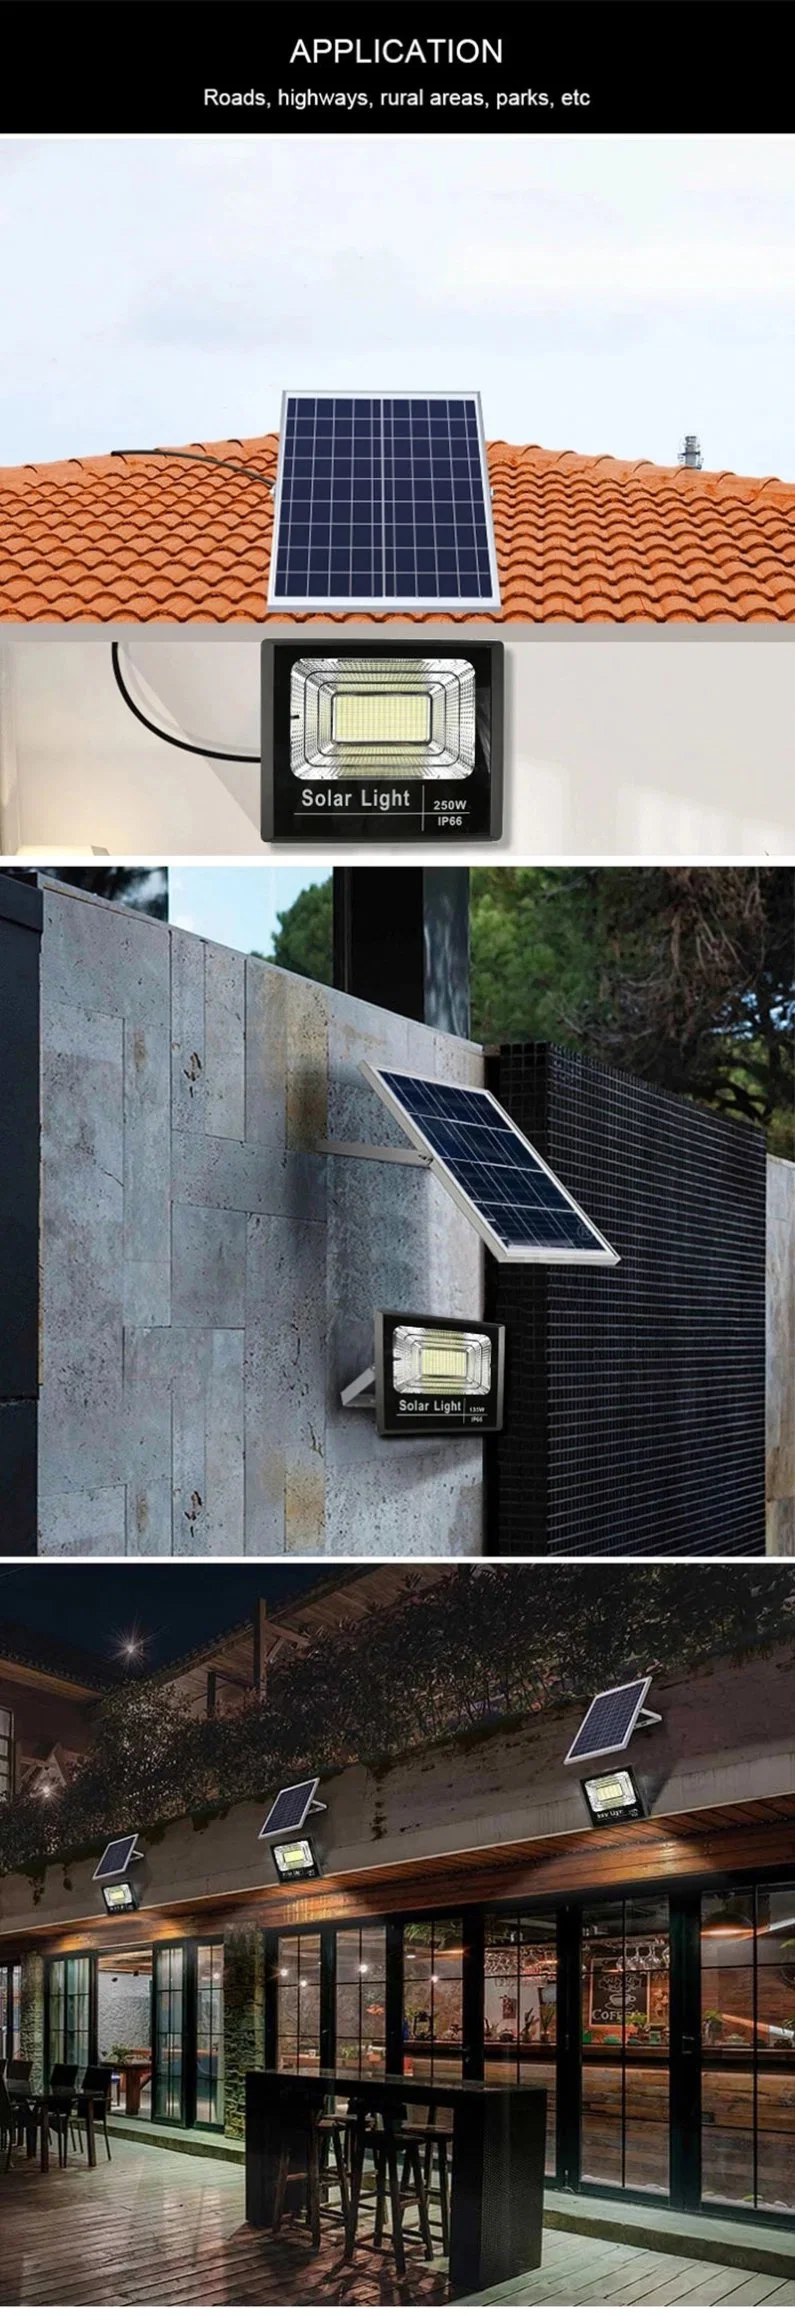 Super Bright 150W 200W Reflectores Lamp 300W Outdoor Motion Sensor Lampara Dusk to Dawn with Remote Control Solar Power Security Post Spotlights Flood Lights